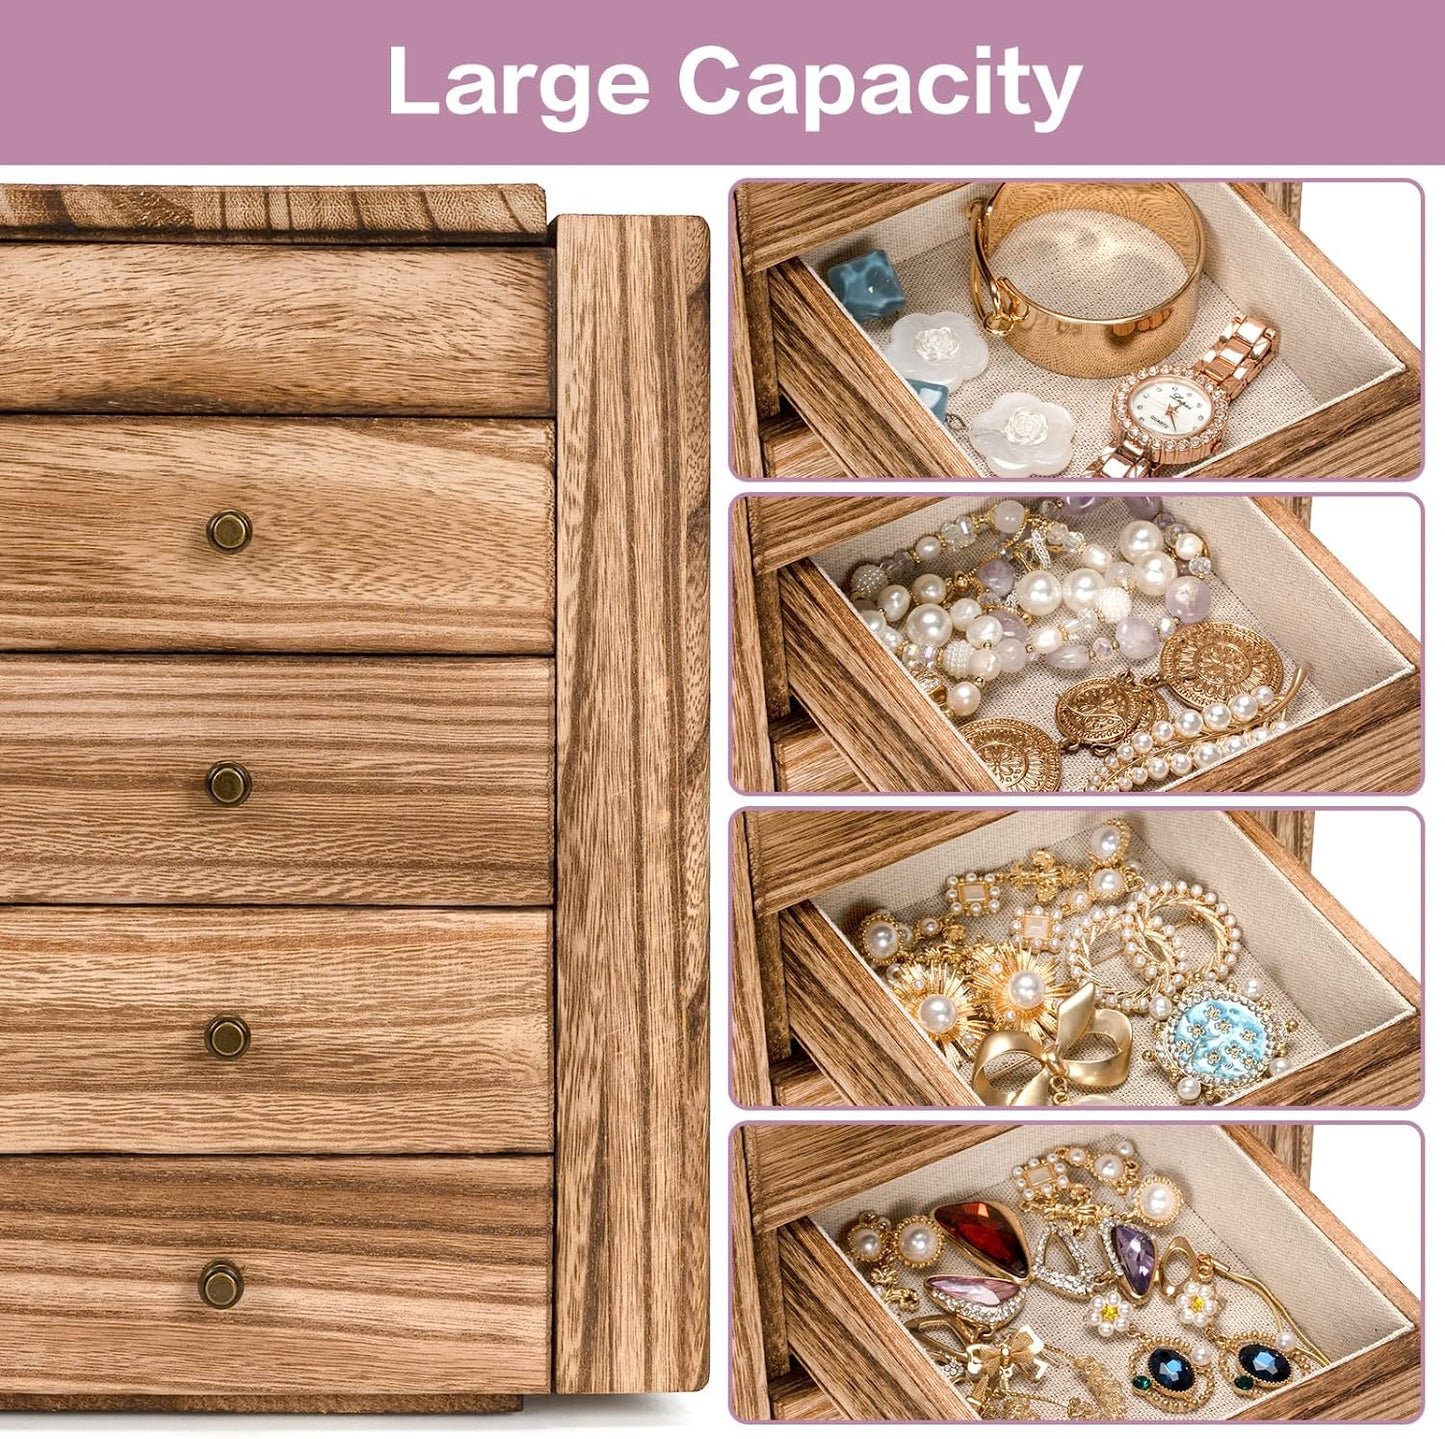 Jewelry Box Wood for Wowen, 5-Layer Large Organizer Box with Mirror & 4 Drawers for Rings, Earrings, Necklaces, Vintage Style Torched Wood